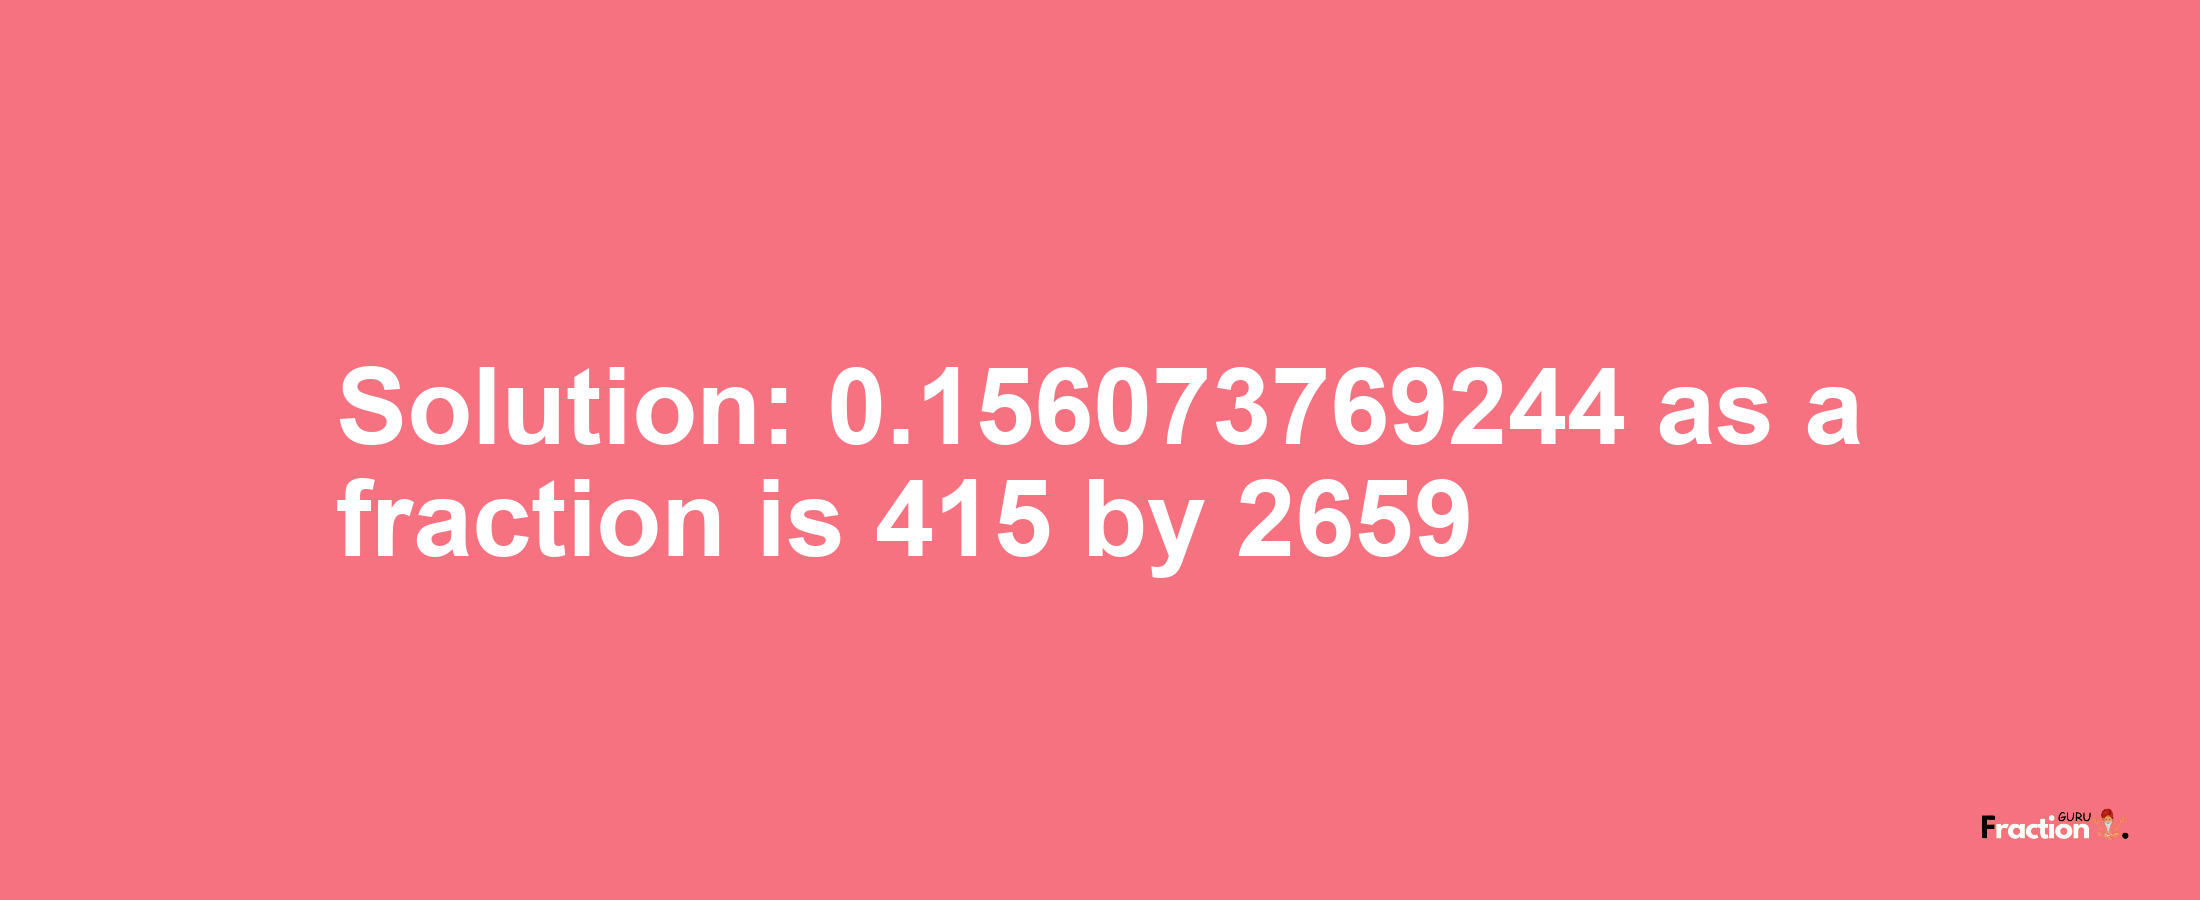 Solution:0.156073769244 as a fraction is 415/2659